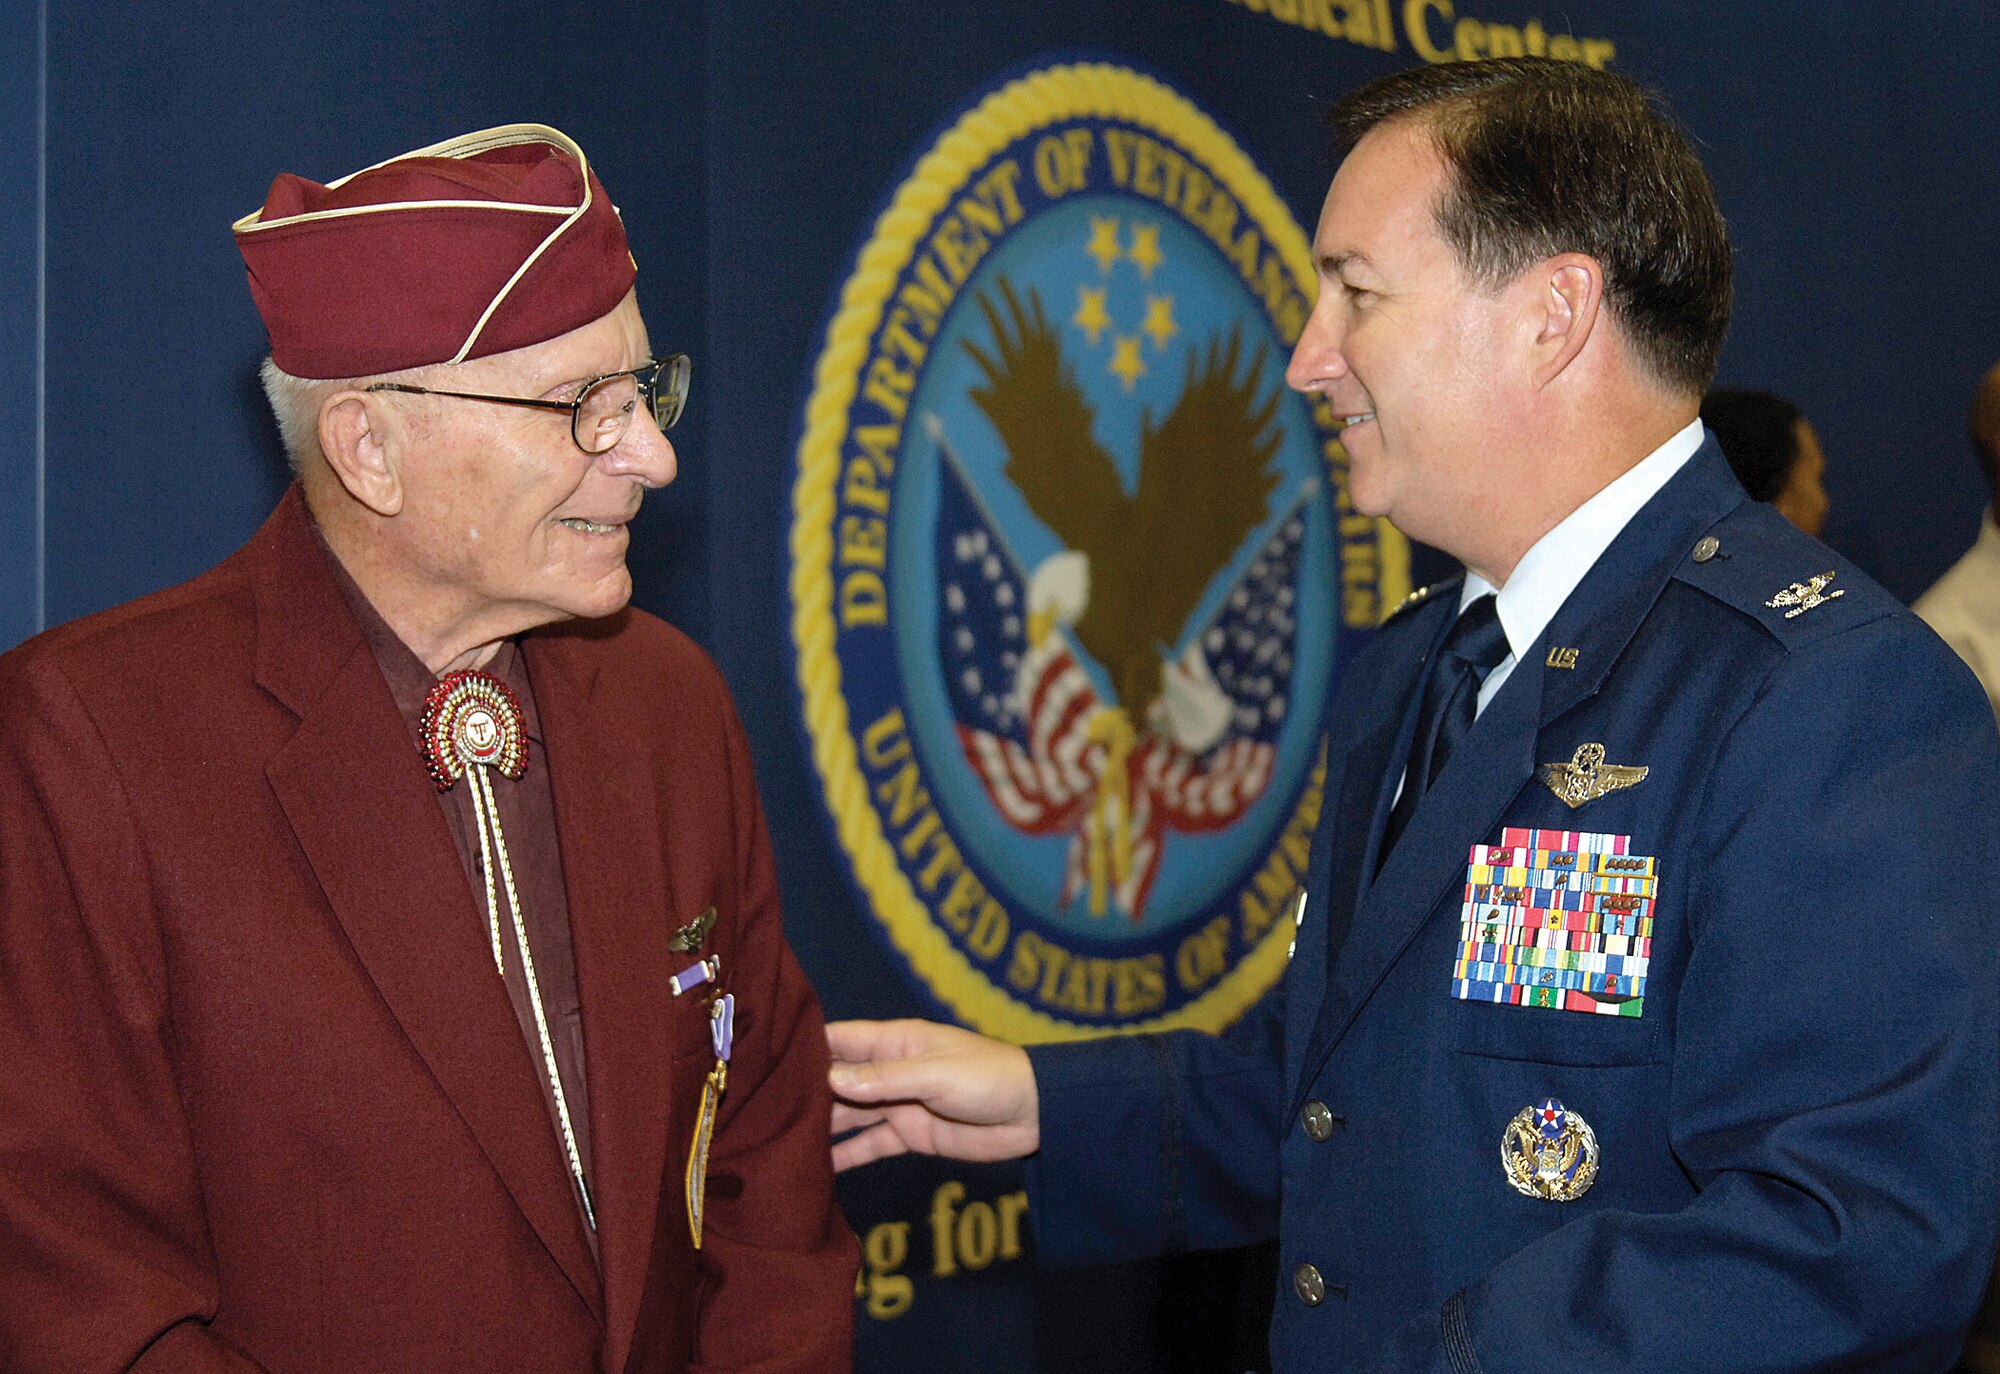 World War II veteran and ex-prisoner of war Delbert Coulter visits with Col. Joseph Rossacci, 552nd Air Control Wing vice commander, after a Veterans Day program Nov. 10 at the Veterans Affairs Medical Center in Oklahoma City. The B-24 flight engineer and top turret gunner told of being shot down and his 14-month imprisonment during a bitterly cold German winter. Repeated “thank yous” from Tinker Airmen and others attending the program brought tears to the veteran’s eyes who said memories of his service are still fresh in his mind. (Air Force photo/Margo Wright)